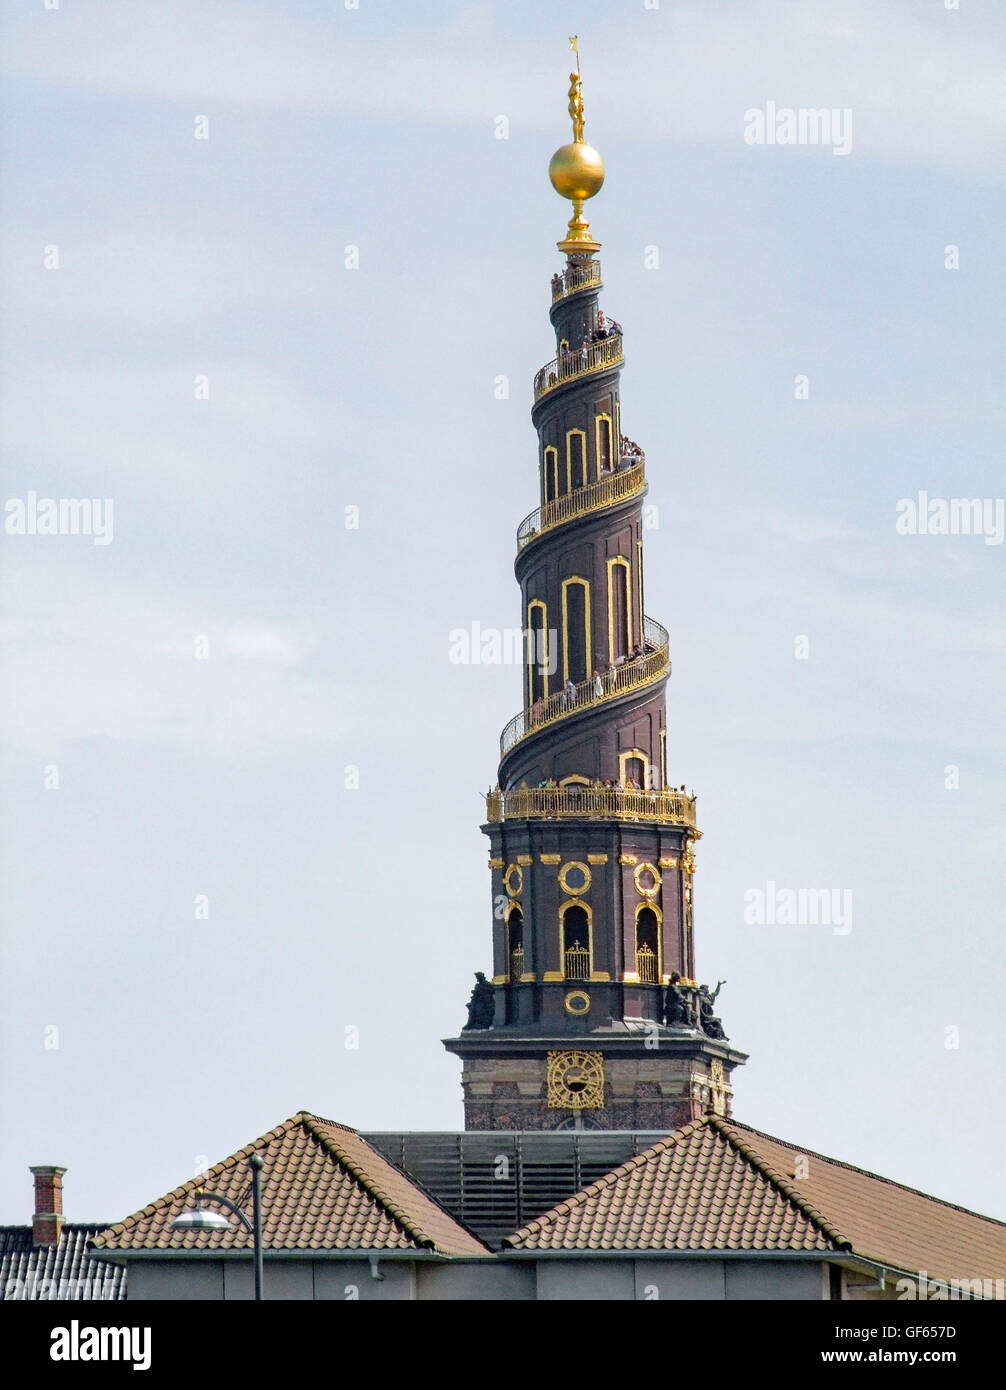 spire of the Church of Our Saviour in Copenhagen, the capital city of Denmark Stock Photo